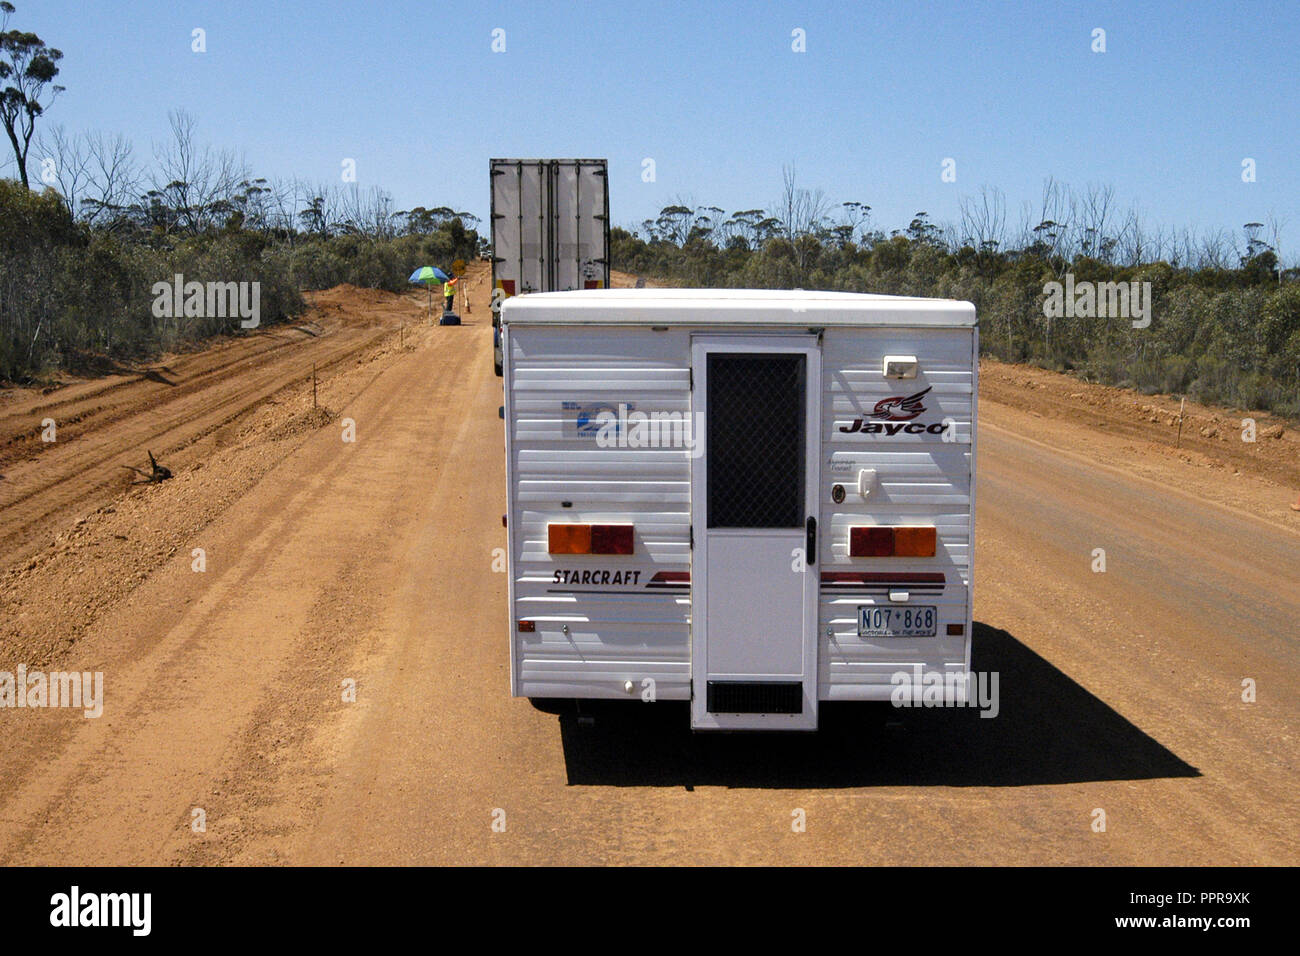 A CARAVAN AND LARGE TRUCK STOPPED TO ALLOW TRAFFIC TO PASS FROM THE OPPOSITE DIRECTION DURING ROADWORKS IN OUTBACK AUSTRALIA Stock Photo